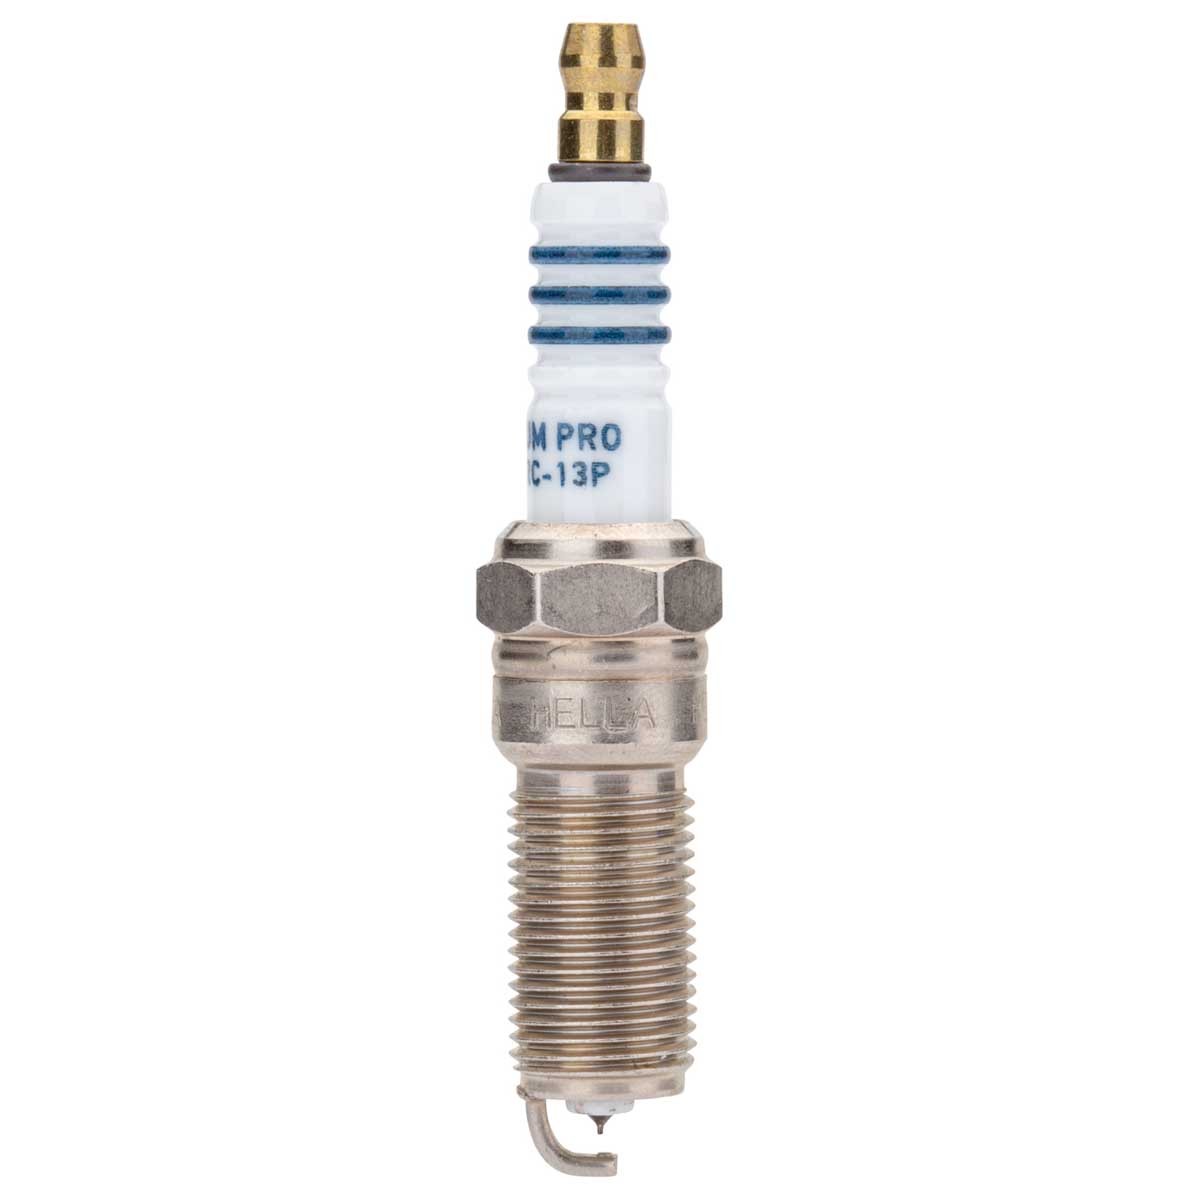 Great value for money - HELLA Spark plug 8EH 188 706-011